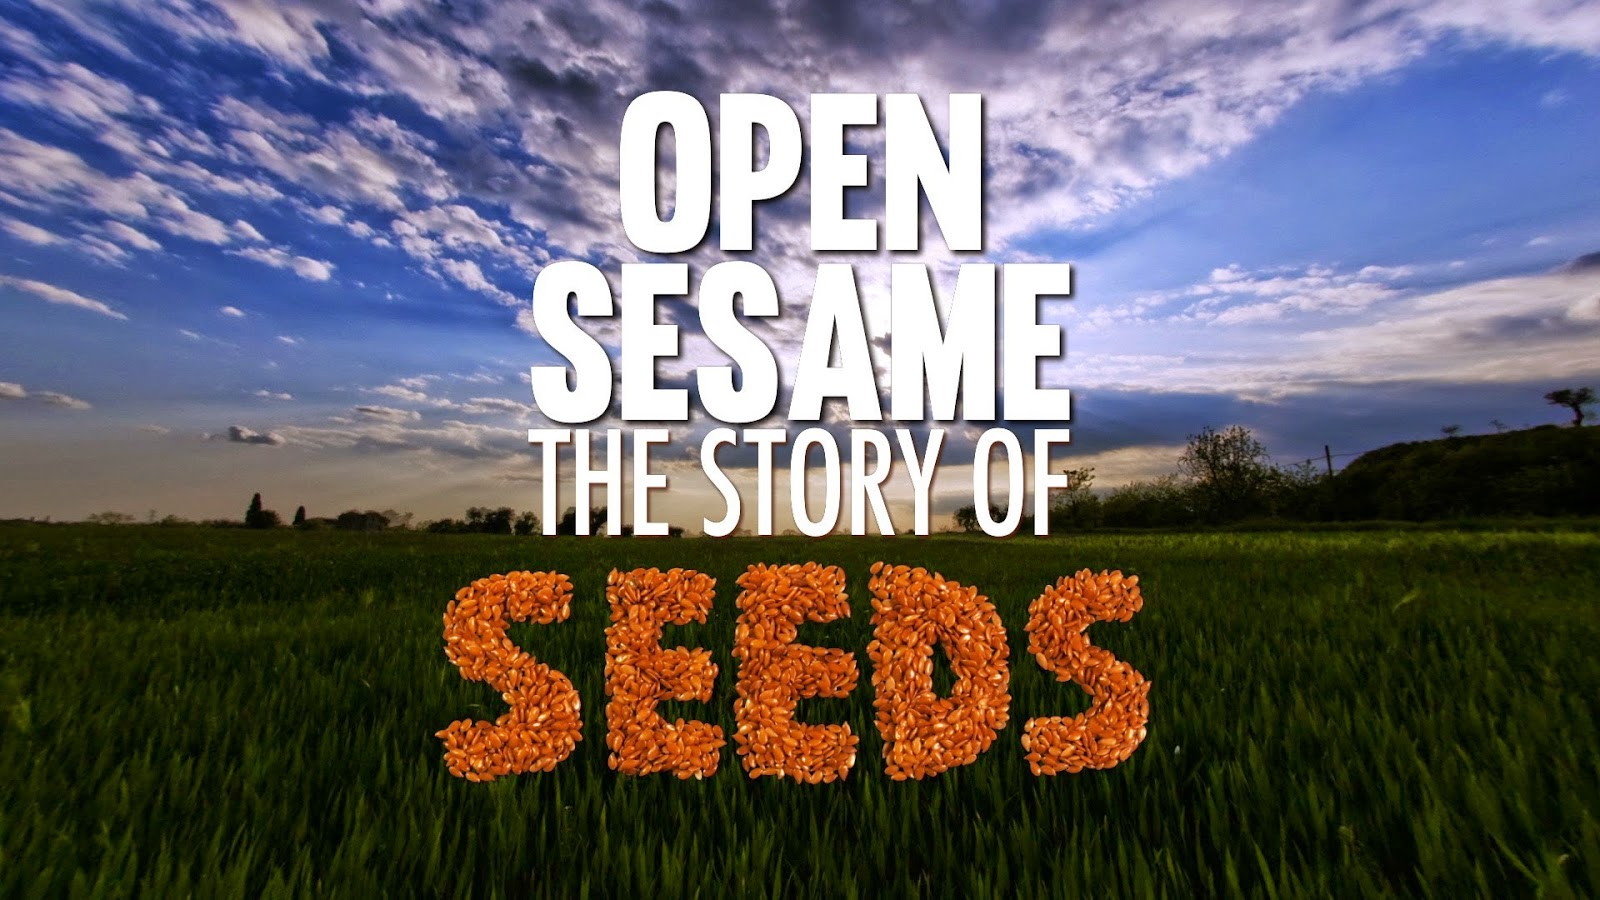 story of seeds - Σόλων ΜΚΟ